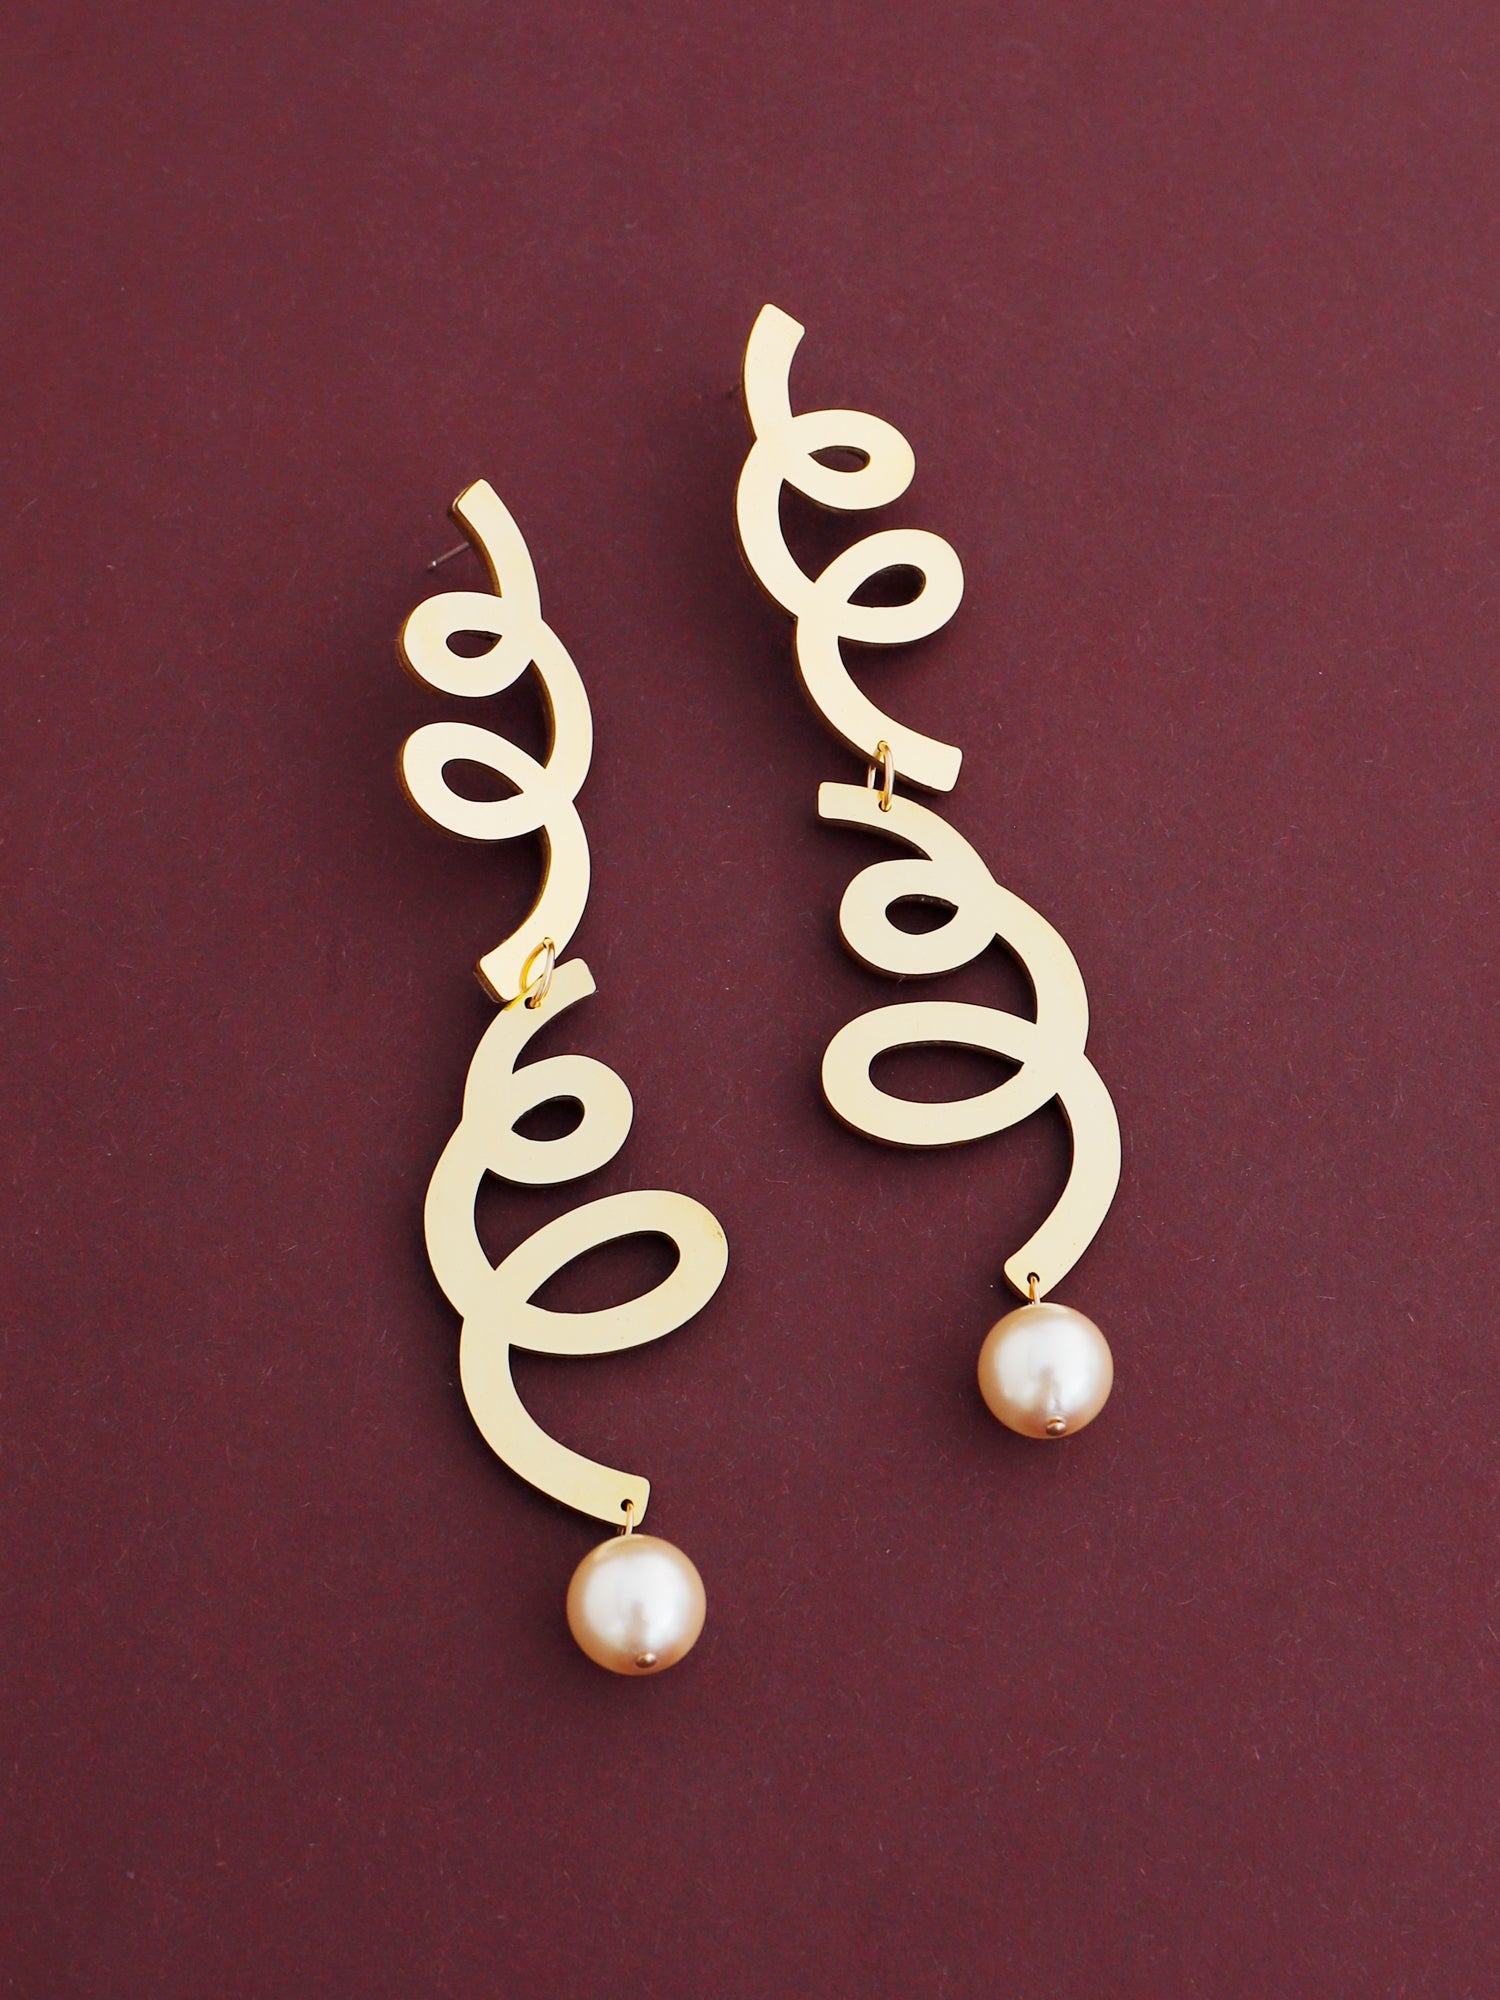 Lola Statement Earrings in Brass. Curly asymmetric statement earrings made in brass with our signature wood base, Czech glass baroque pearls, 14k gold-filled chain and sterling silver earring posts. Made in the UK by Wolf & Moon.